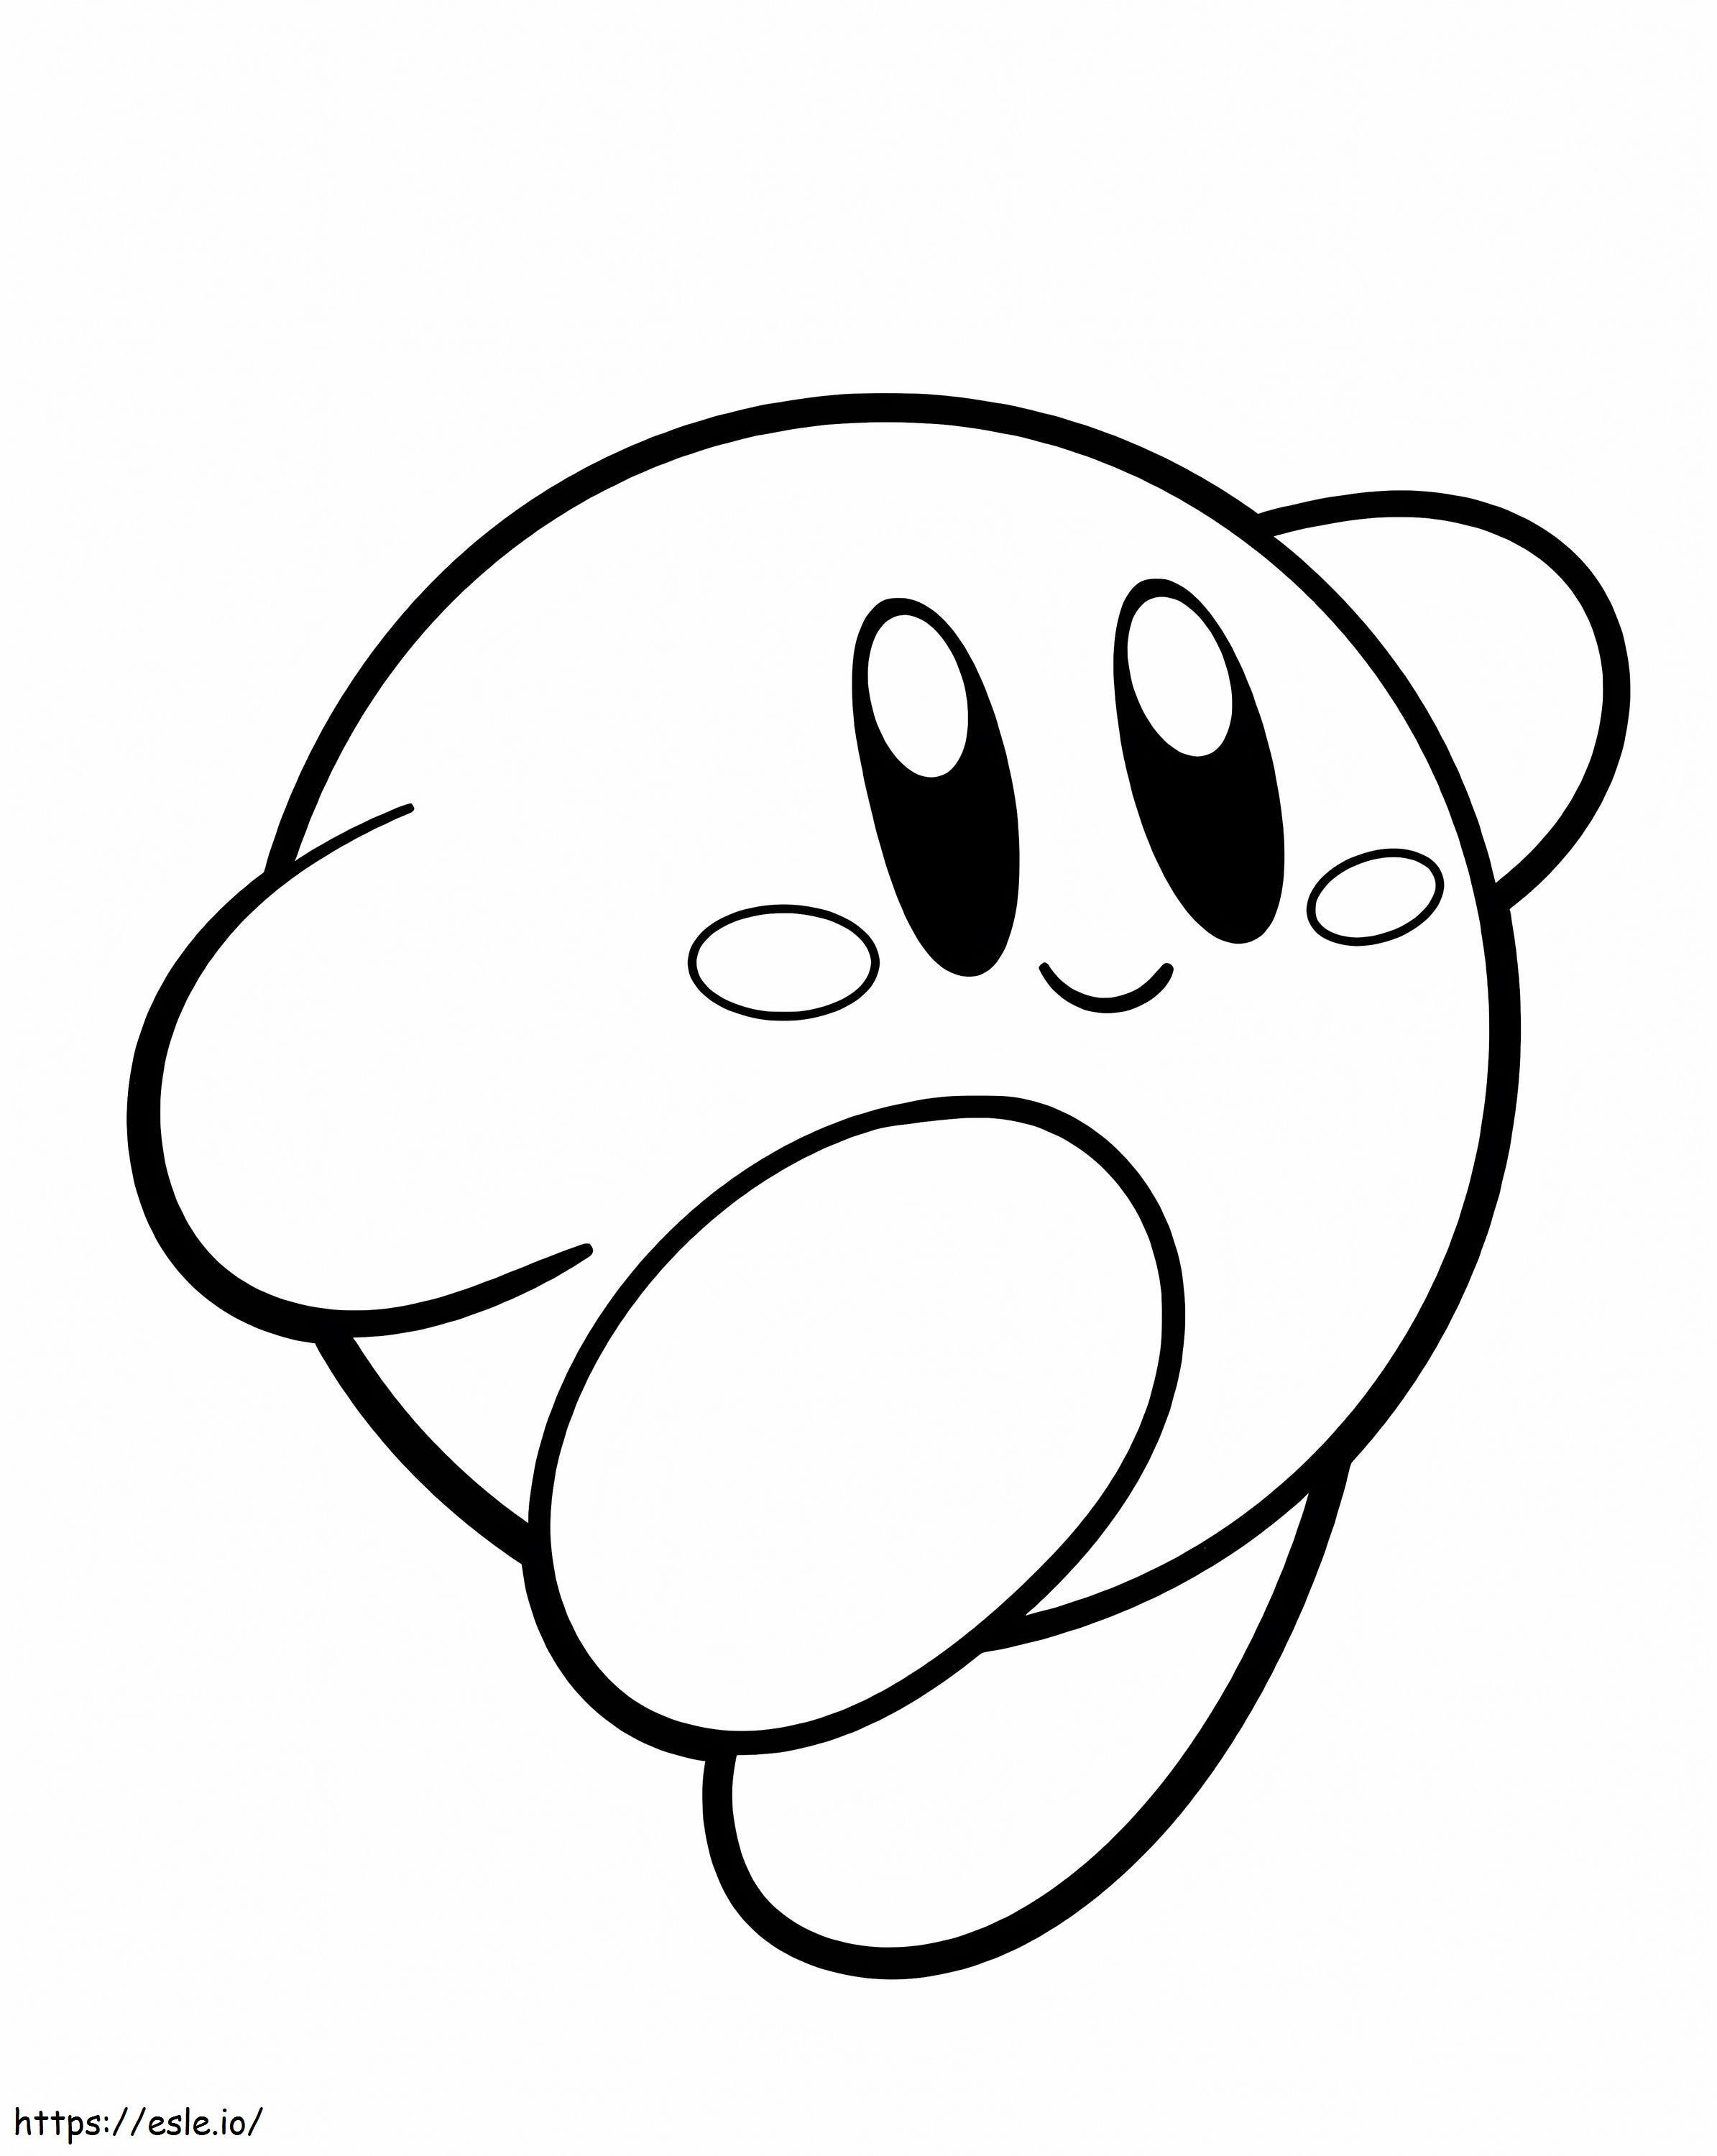 Cute Kirby Running coloring page